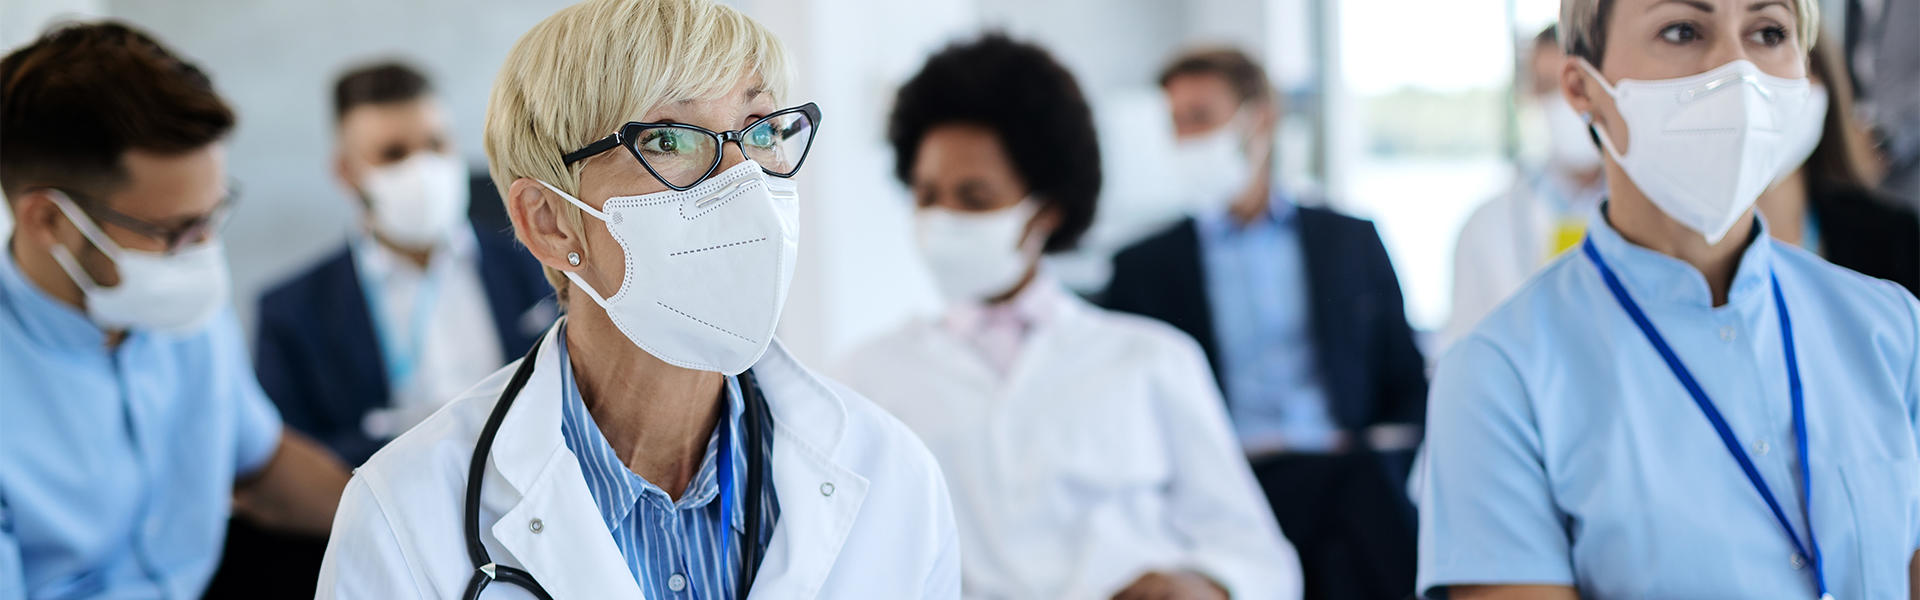 Healthcare professionals sit in a class wearing masks